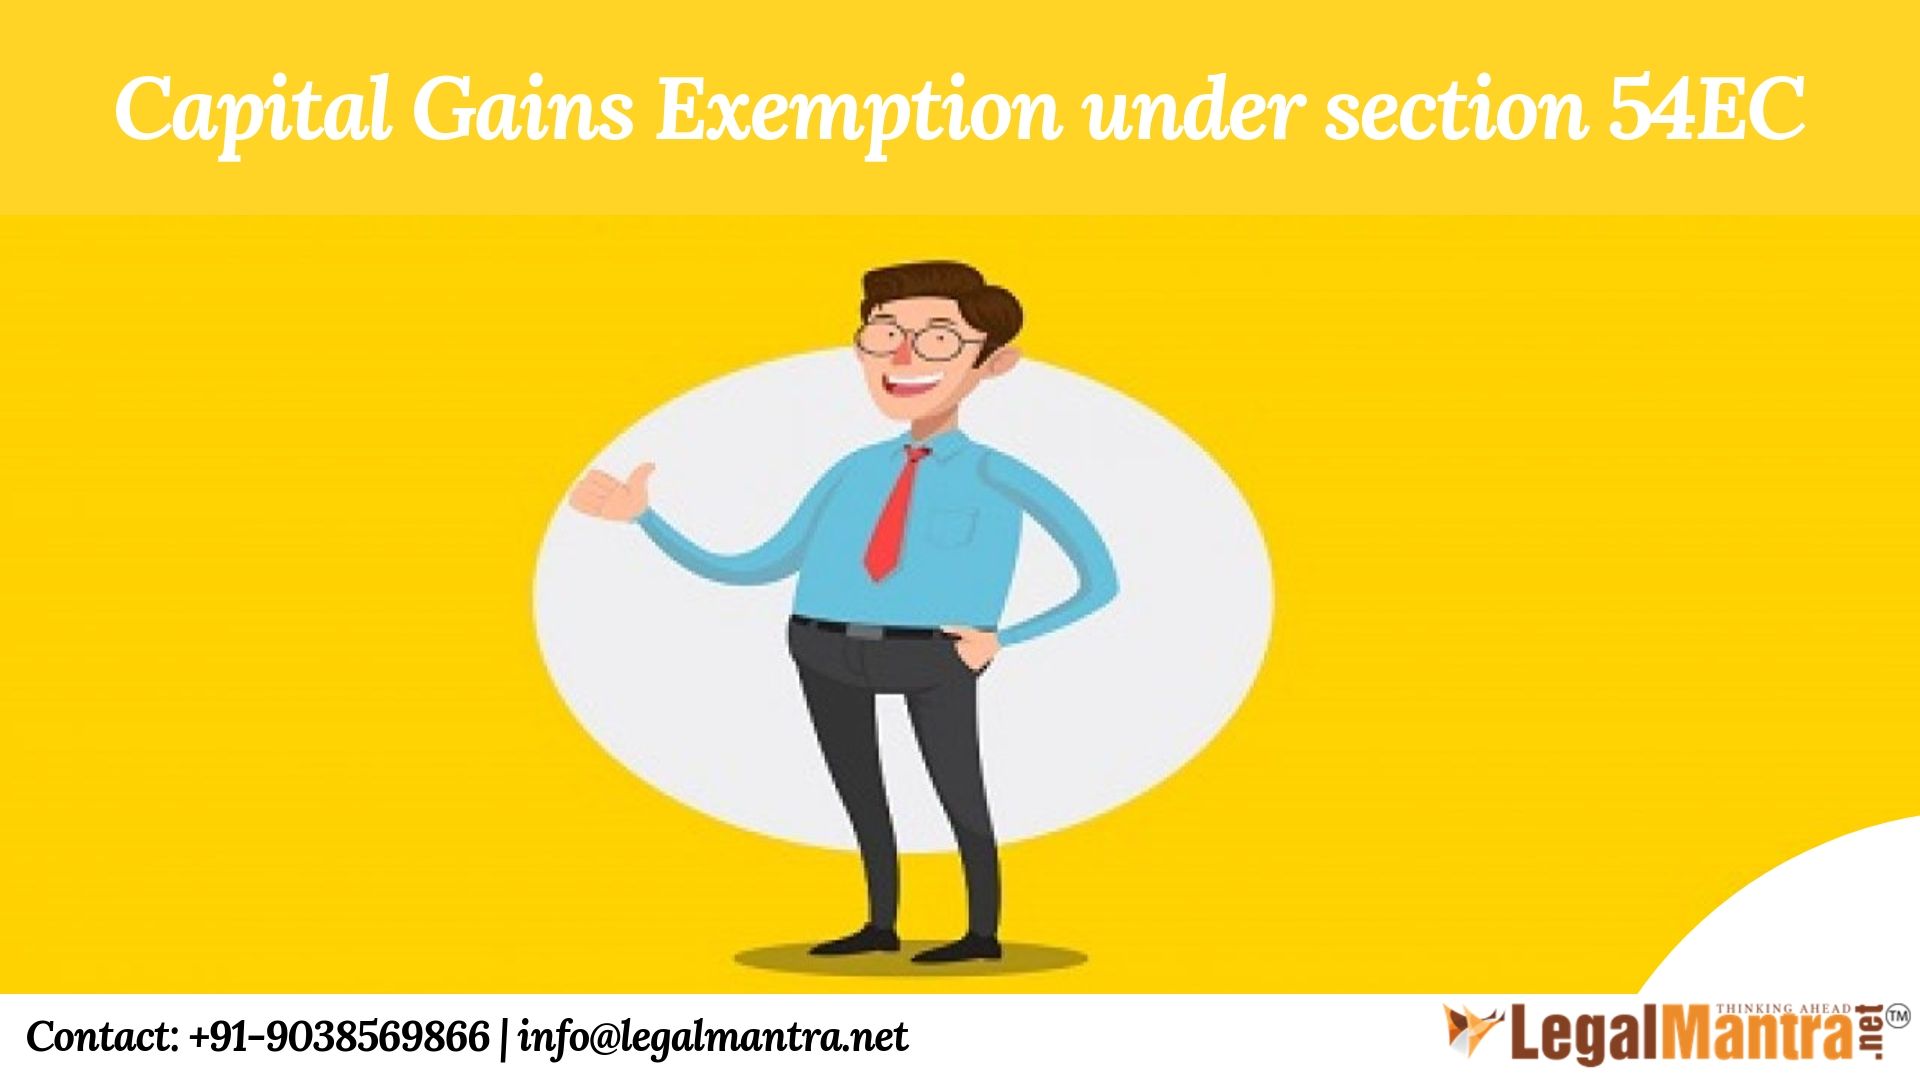 Capital gains exemption under section 54EC if there is a delay in receipt of sale consideration amount and amount is invested after prescribed time period